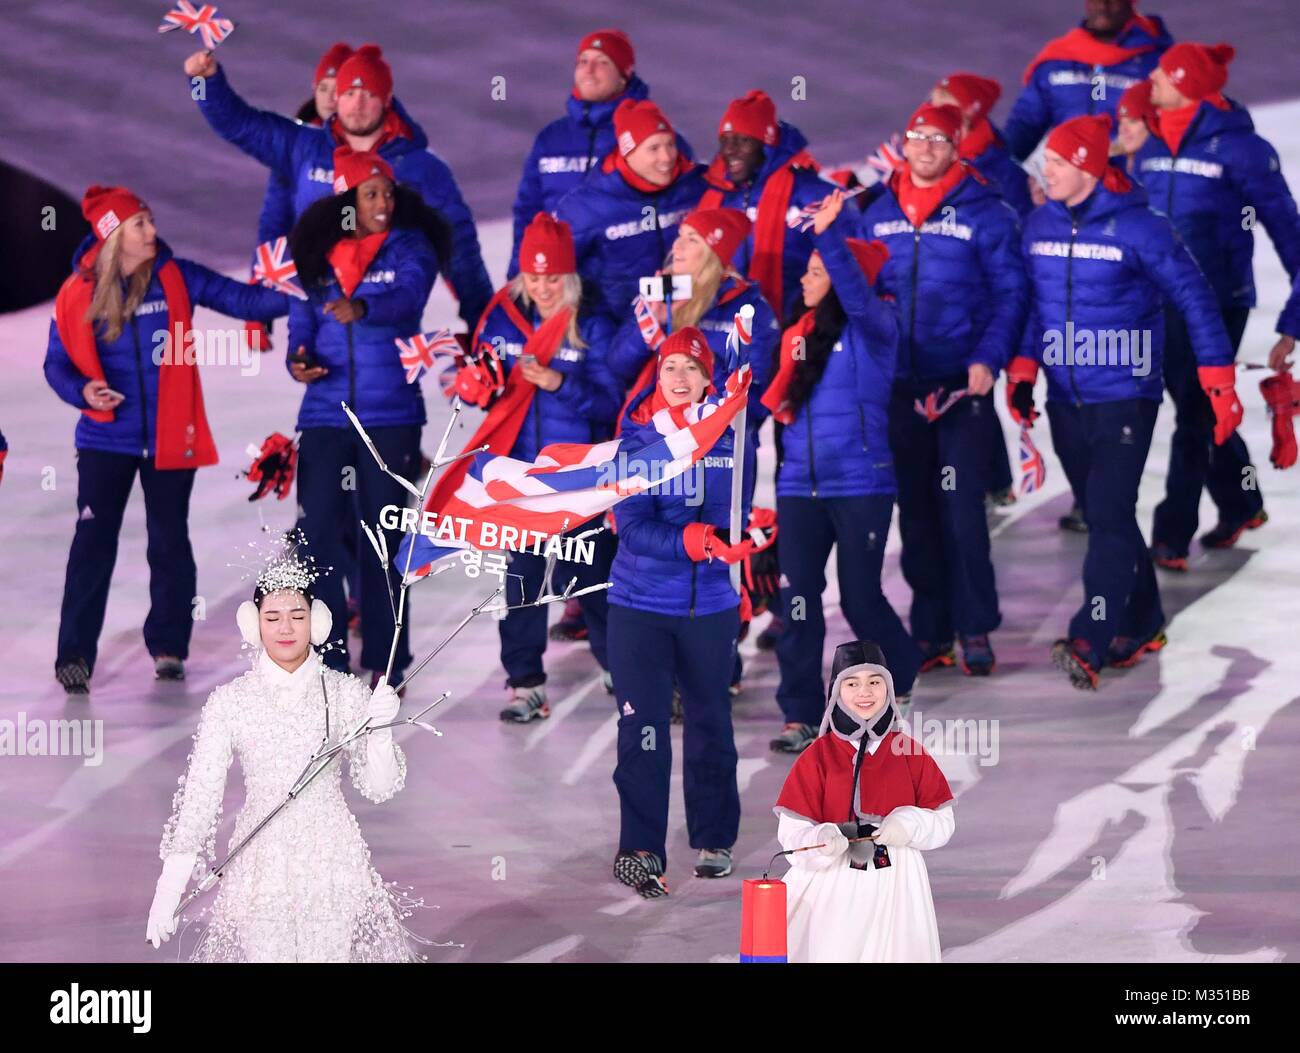 Lizzy Yarnold (GBR) carries the flag and leads the teamGB delegation into the stadium. Opening Ceremony. Pyeongchang2018 winter Olympics. Olympic stadium. Pyeongchang. Republic of Korea. 09/02/2018. Stock Photo